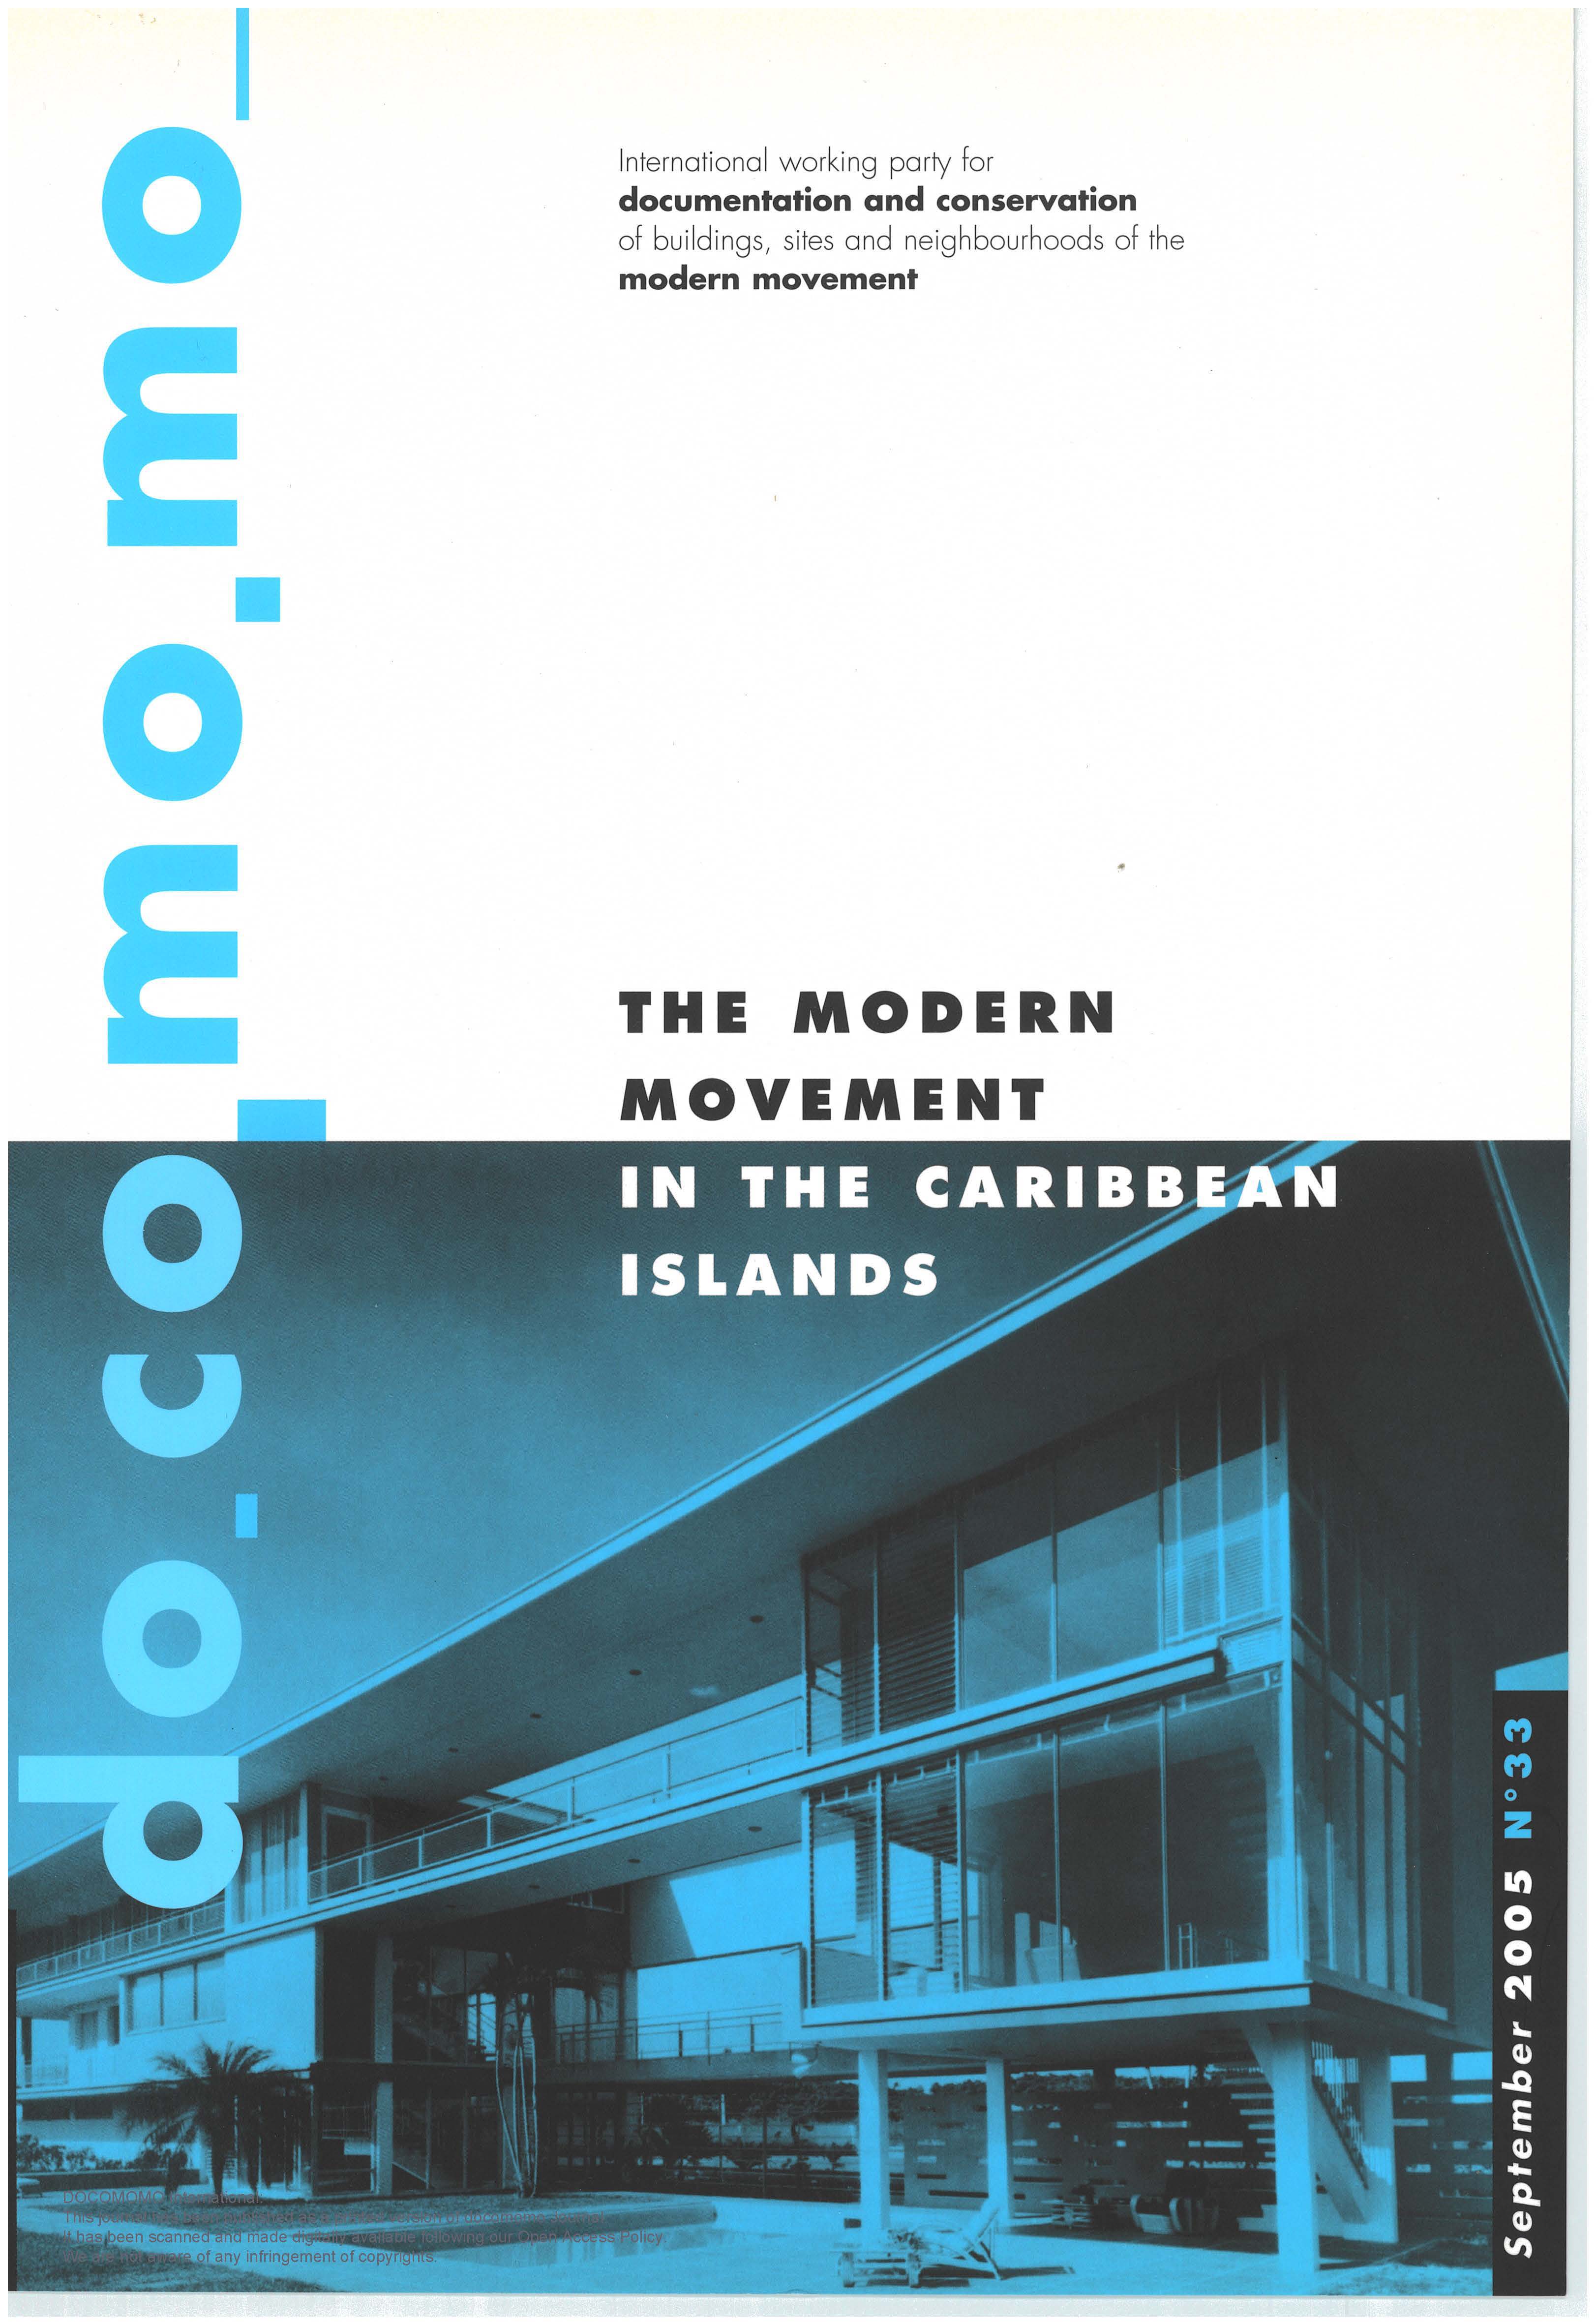 						View No. 33 (2005): The Modern Movement in the Caribbean Islands
					